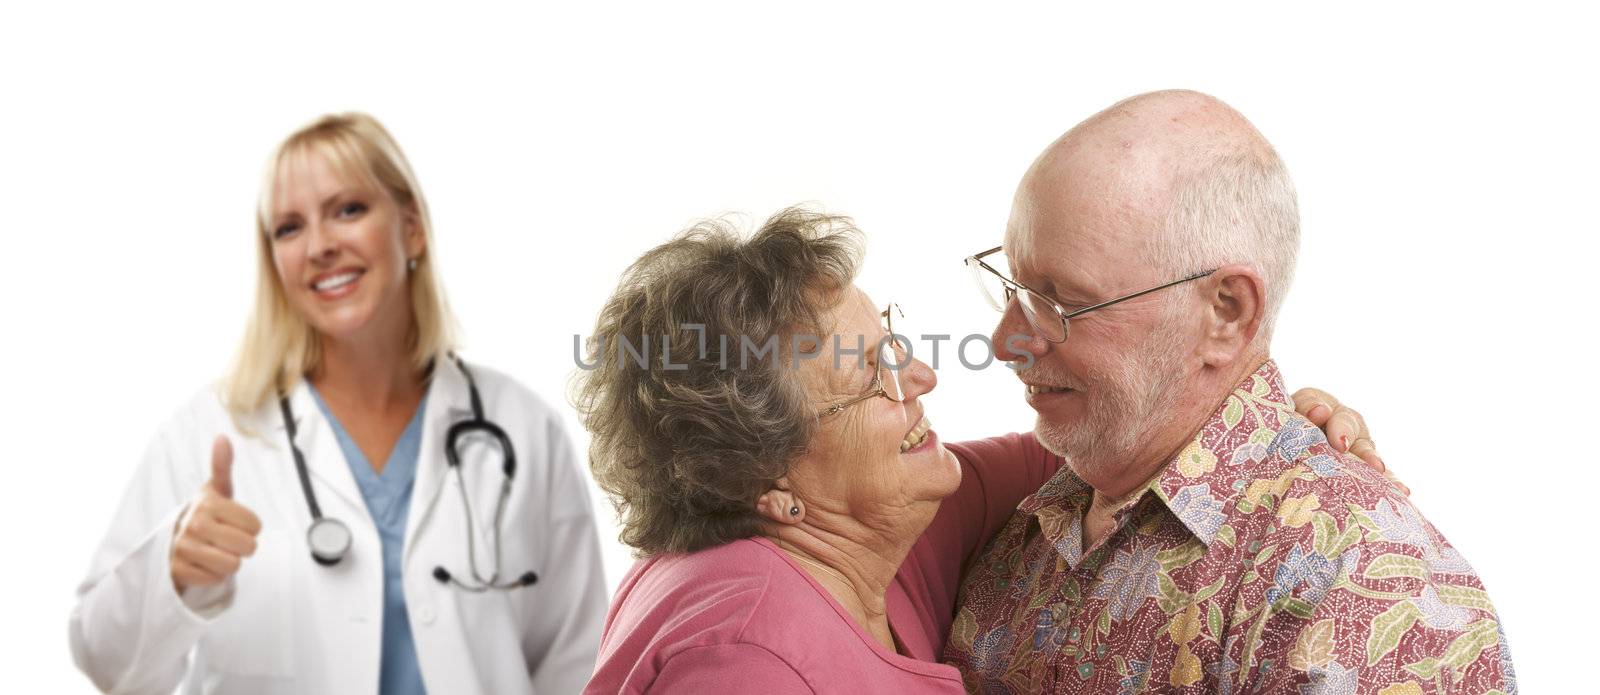 Senior Couple with Medical Doctor or Nurse with Thumbs Up Behind.